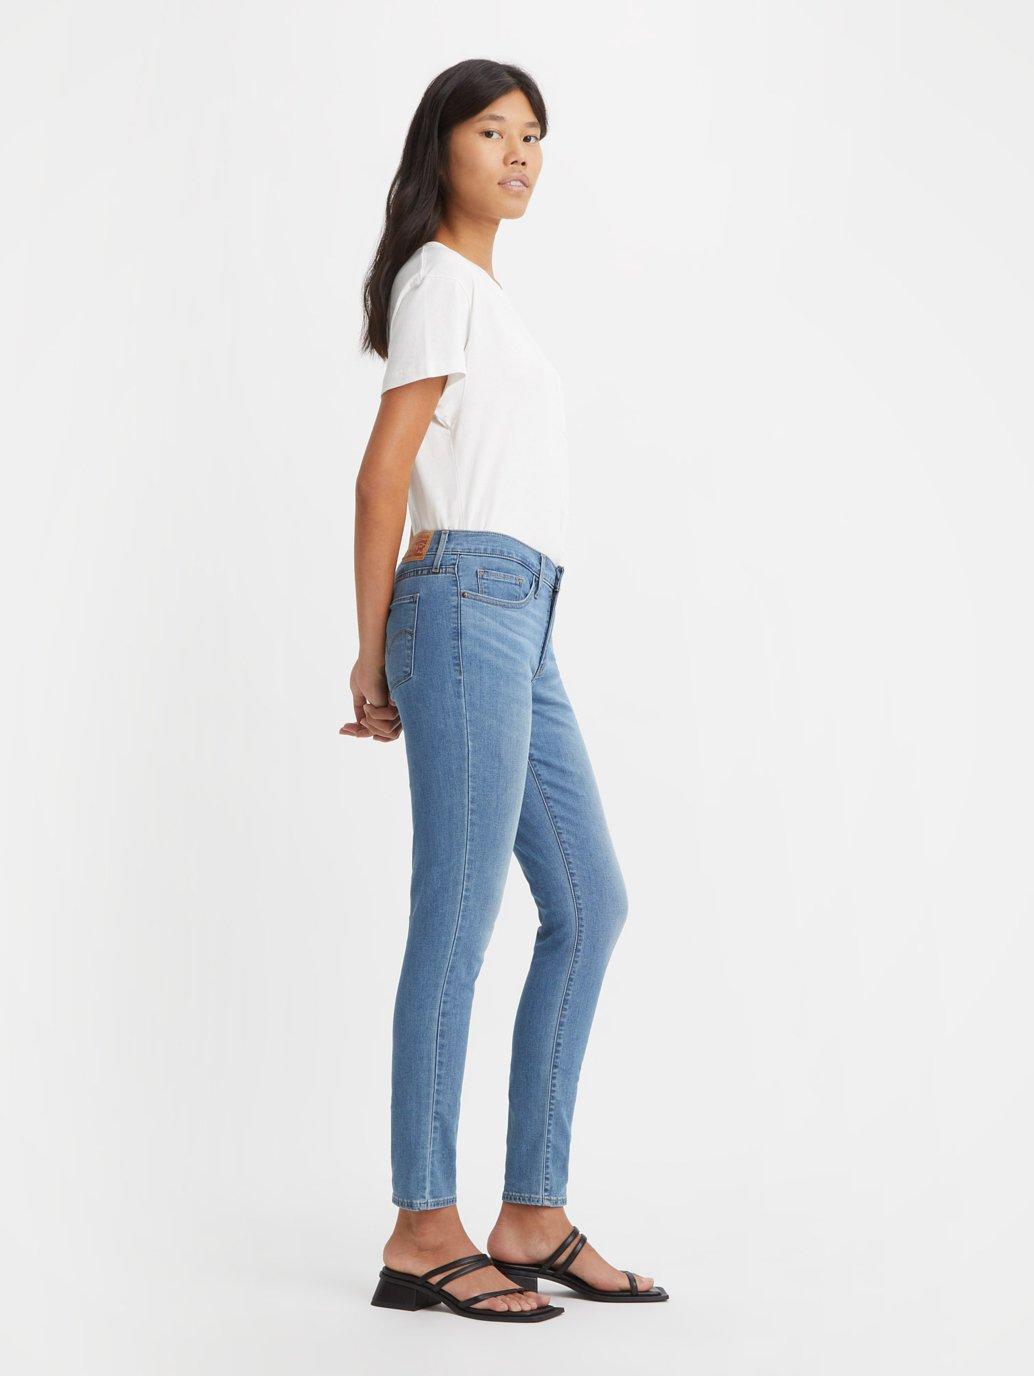 Buy Levi’s® Women's 311 Shaping Skinny Jeans | Levi’s® Official Online ...